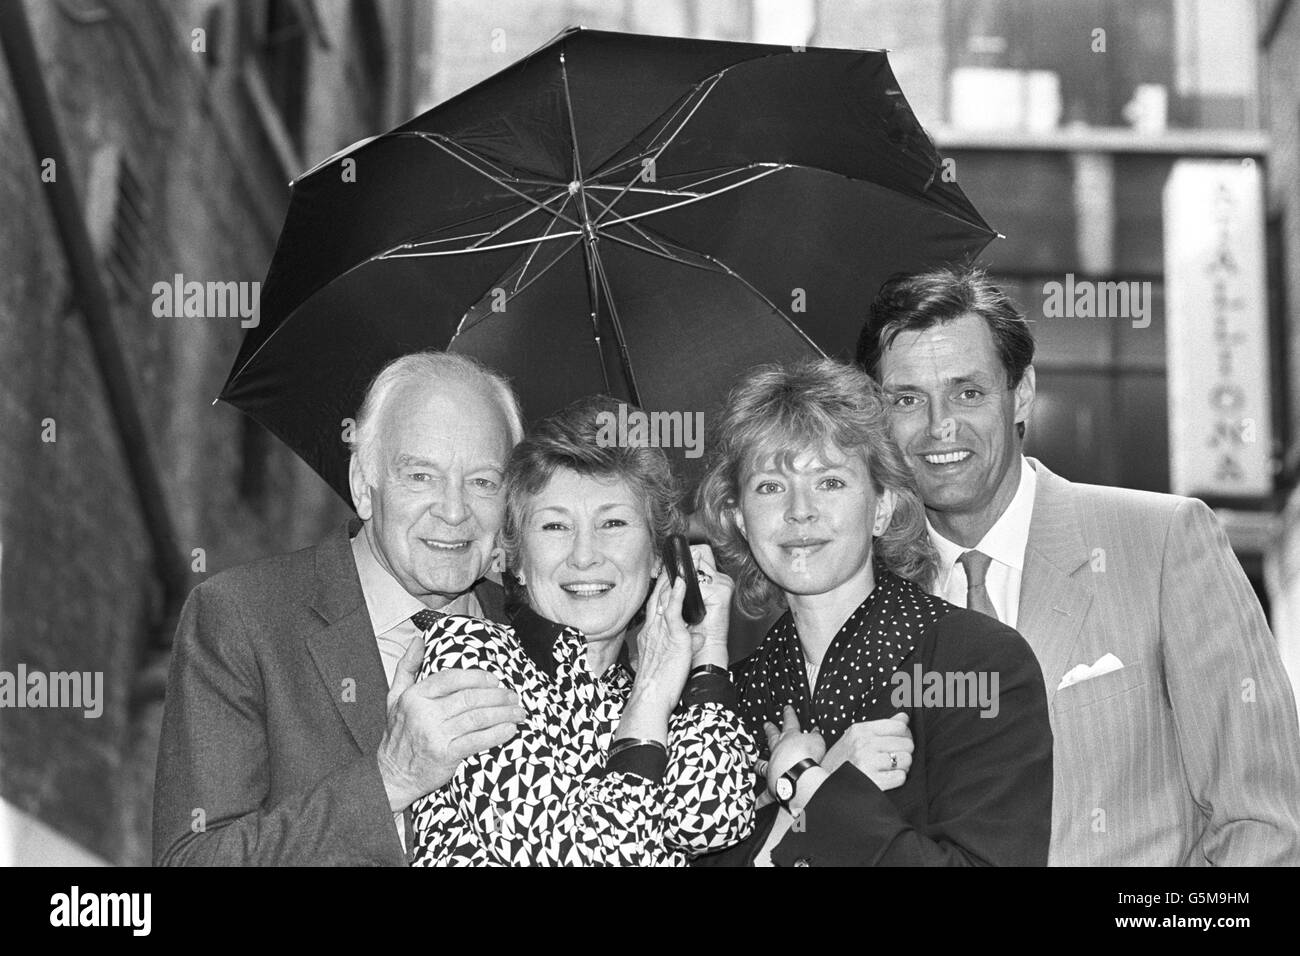 The cast of BBC One's comedy programme 'Don't Wait Up' take cover from the sun under an umbrella in London, after the launch of the fifth series of the father and son saga. The first episode features, from left, Tony Britton, Dinah Sheridan, Jane Booker and Simon Williams. Actor Nigel Havers was absent from the today's launch as he was suffering from laryngitis. Stock Photo